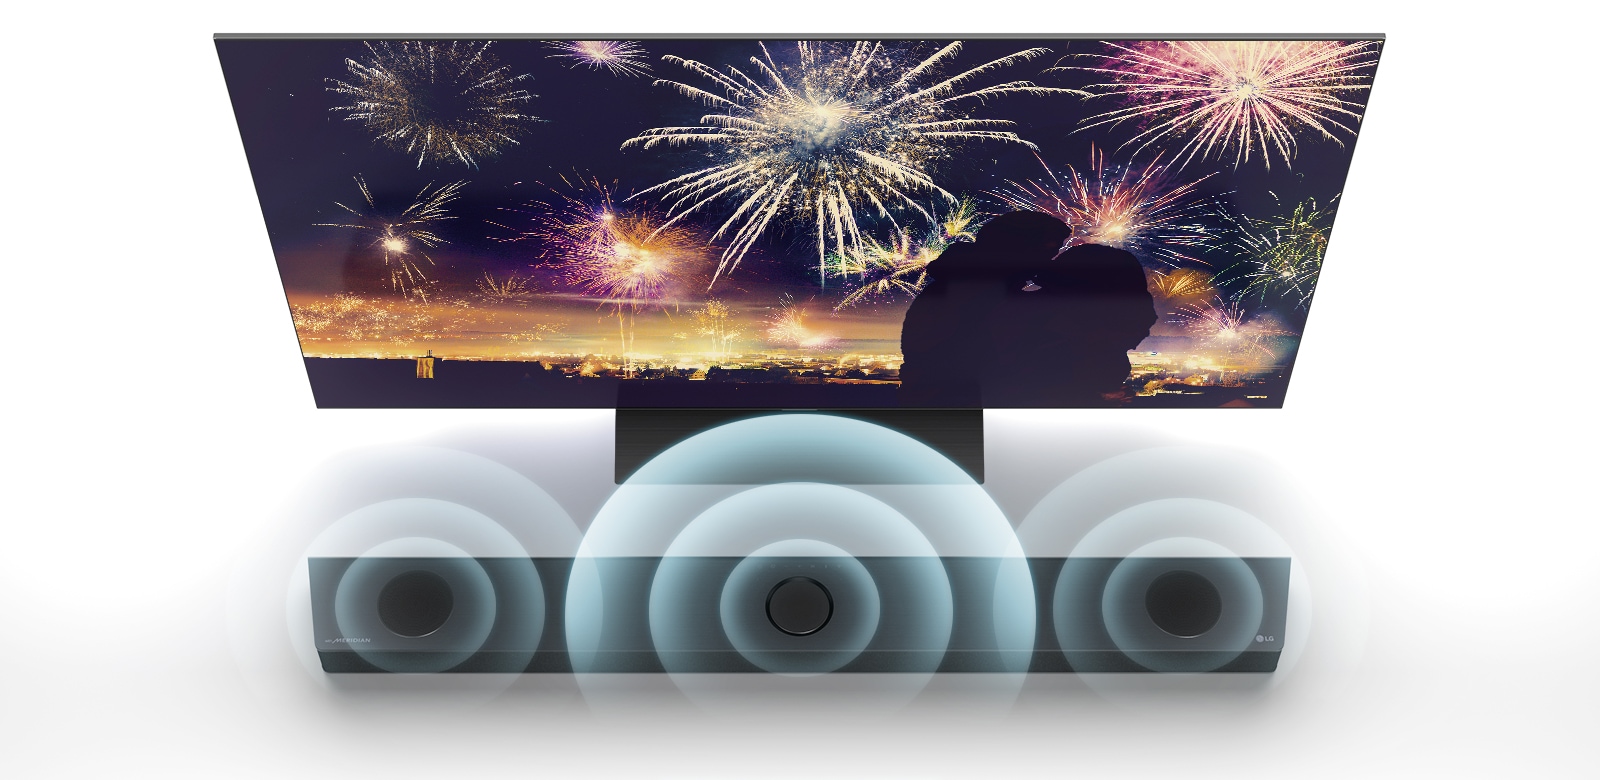 In bird's eye view, LG TV is standing on the floor and LG Sound bar is right below TV in the infinite space. On the TV screen, a silhouette of a couple on the background of fireworks. Soundwave graphics are coming from the center, left, and right speaker of the top of sound bar.